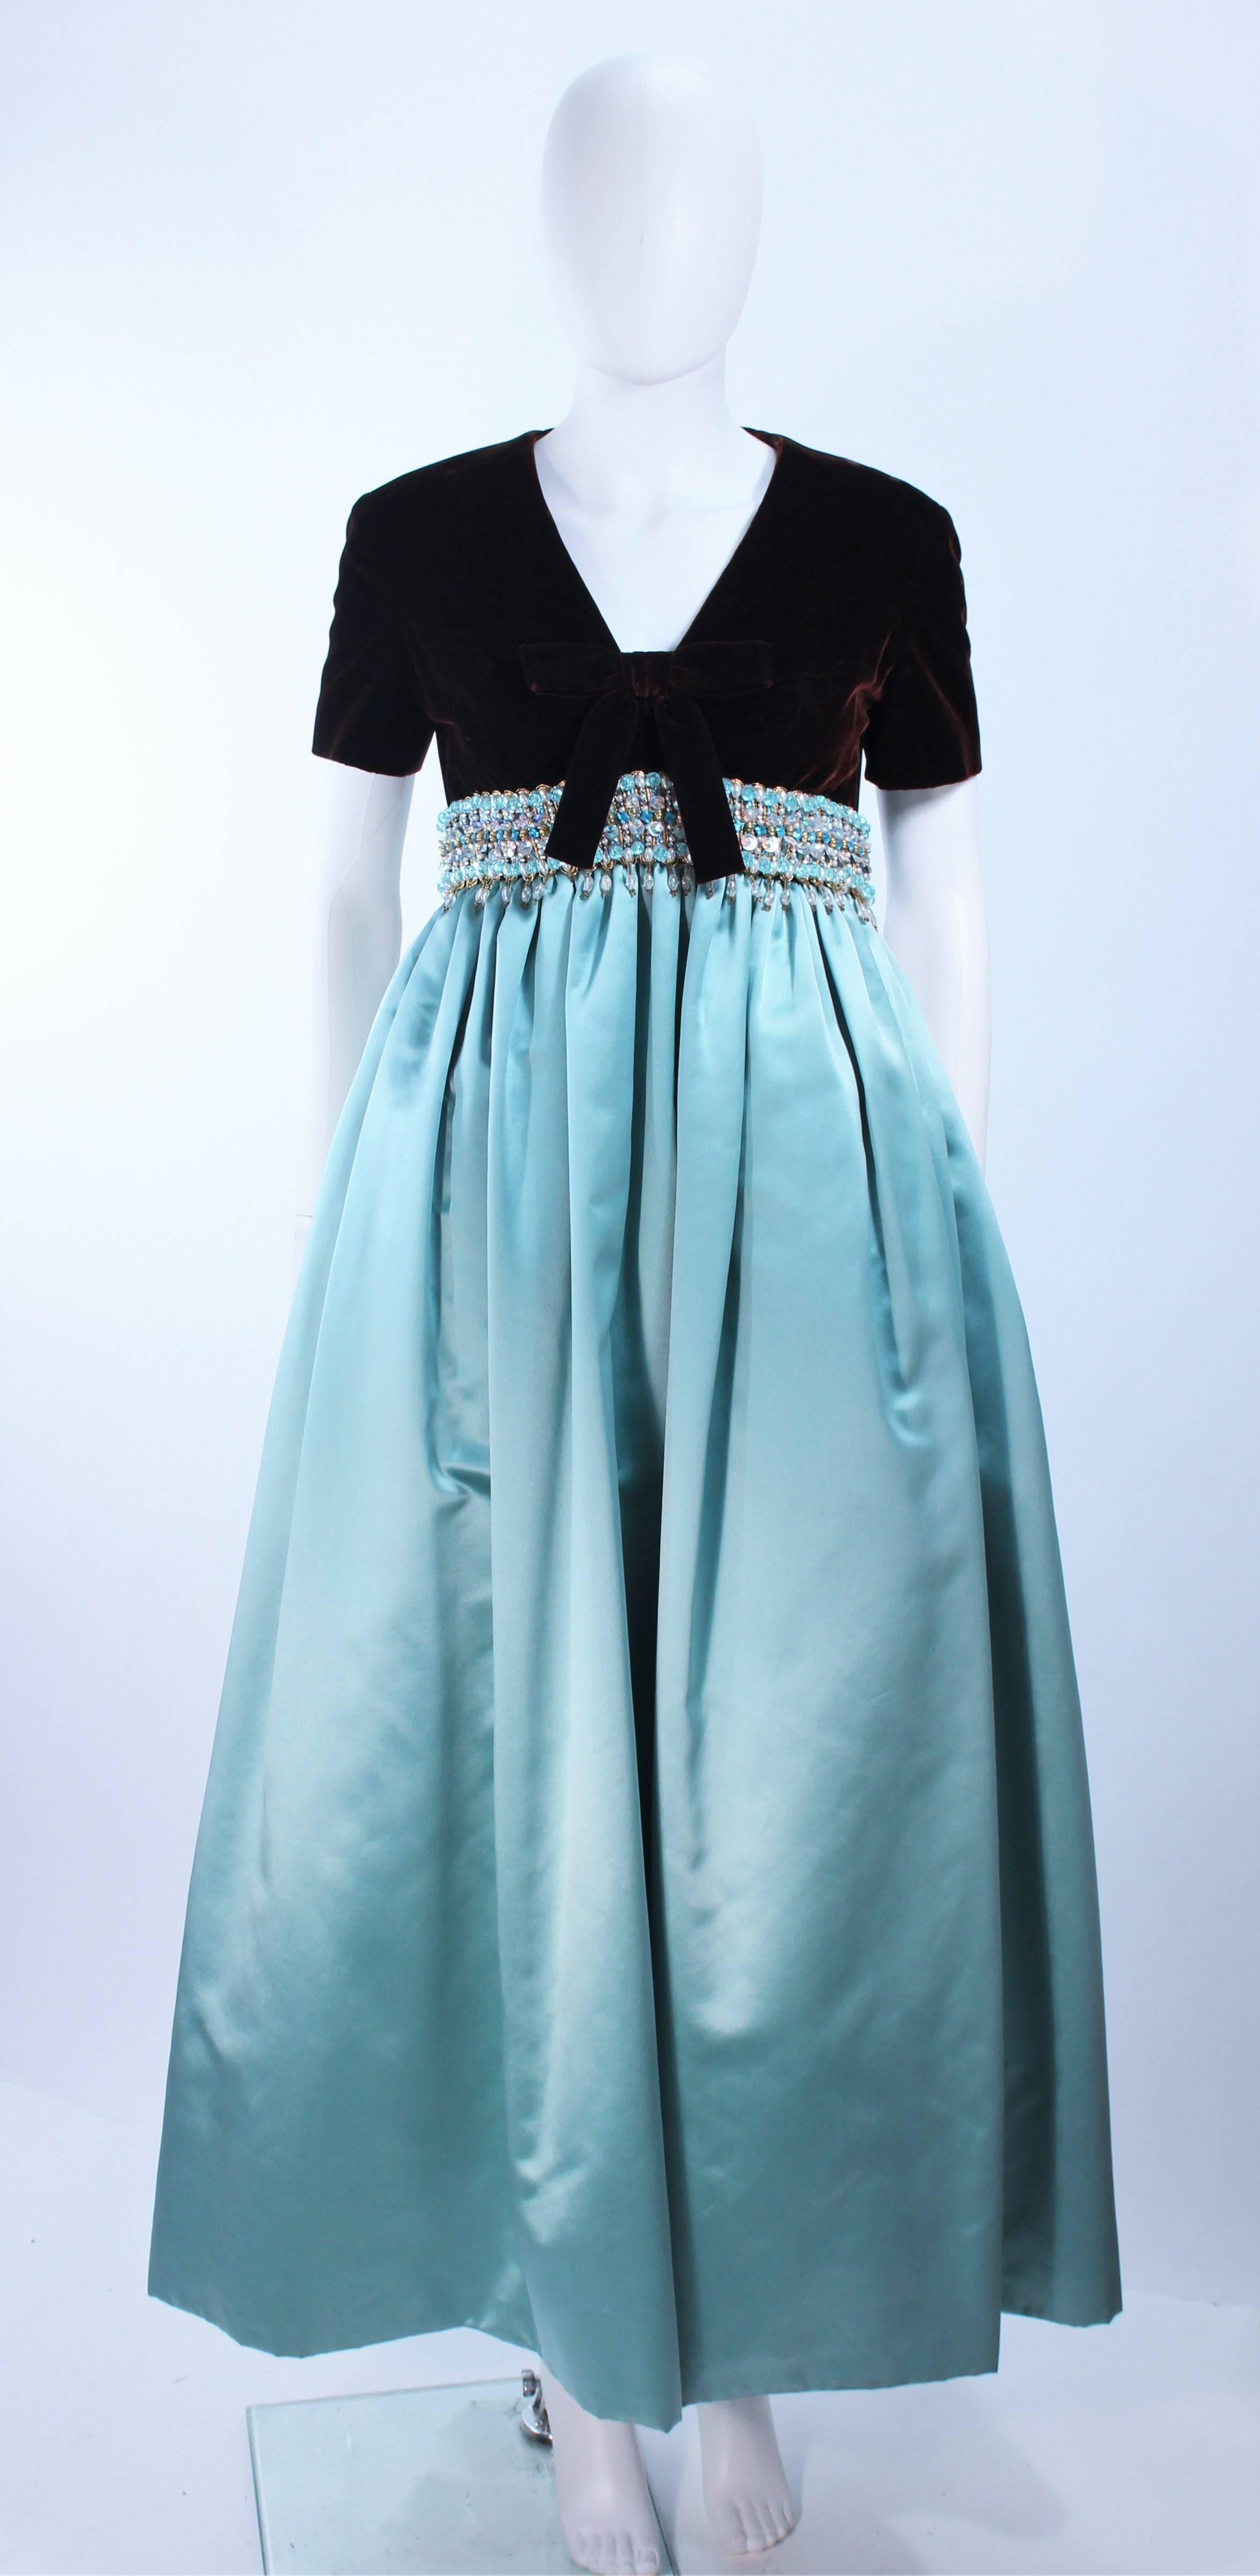 This Sarmi gown is composed of a brown velvet bodice with an embellished waist and silk aqua skirt. Features a center front bow detail. There is a center back zipper closure. In excellent vintage condition.

**Please cross-reference measurements